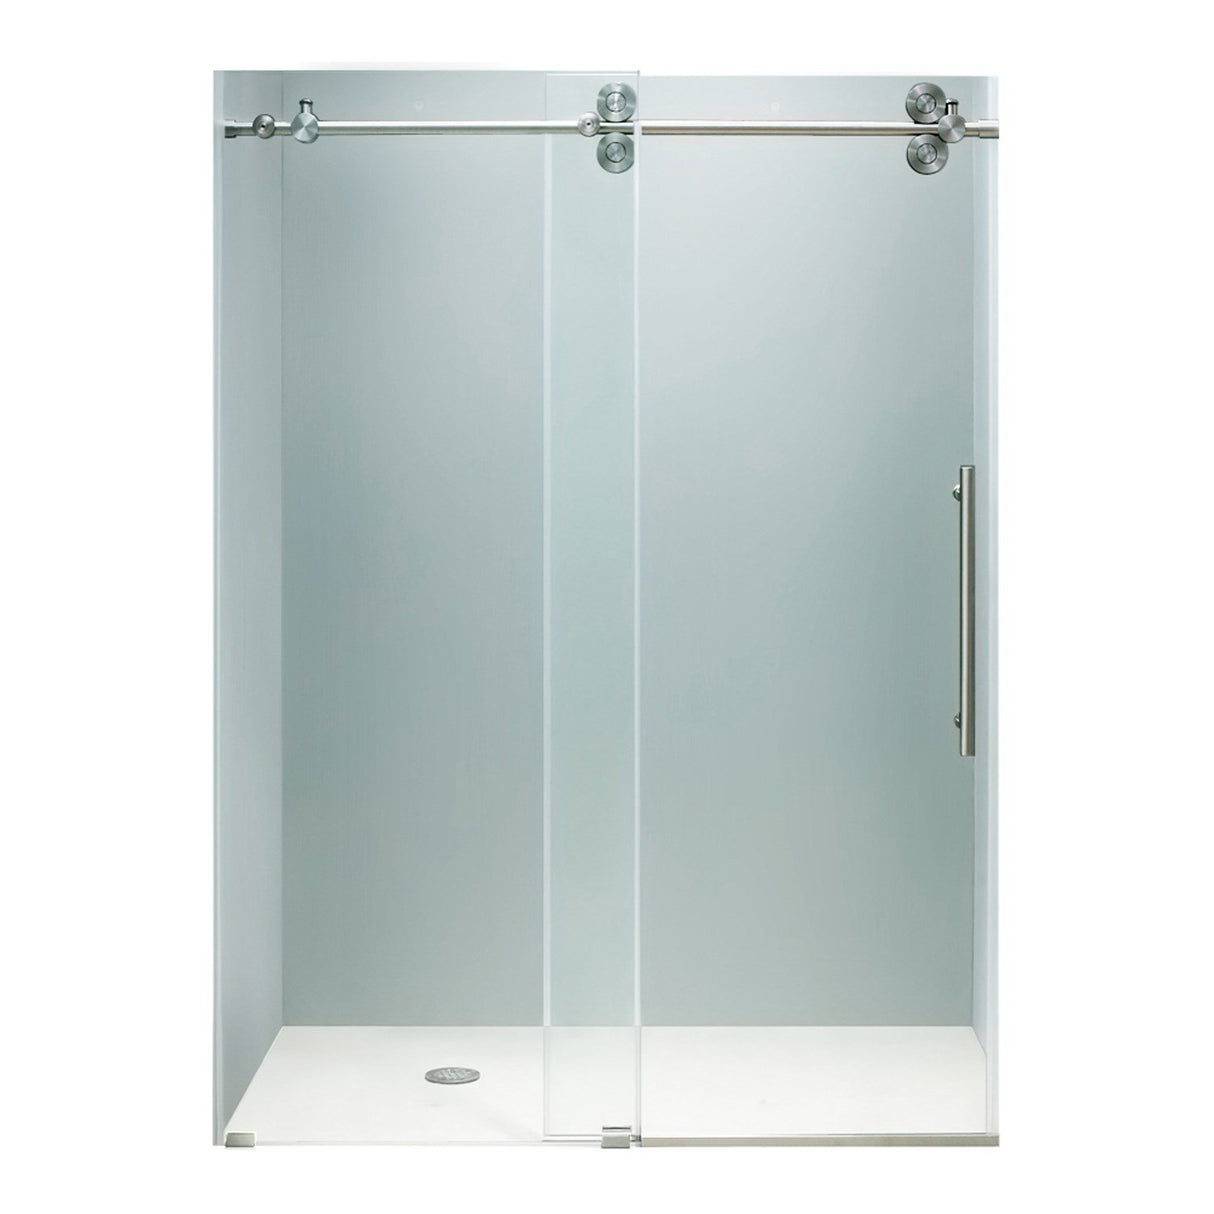 VIGO Adjustable 56 - 60 in. W x 74 in. H Frameless Sliding Rectangle Shower Door with Clear Tempered Glass and Stainless Steel Hardware in Stainless Steel Finish with Reversible Handle VG6041STCL6074